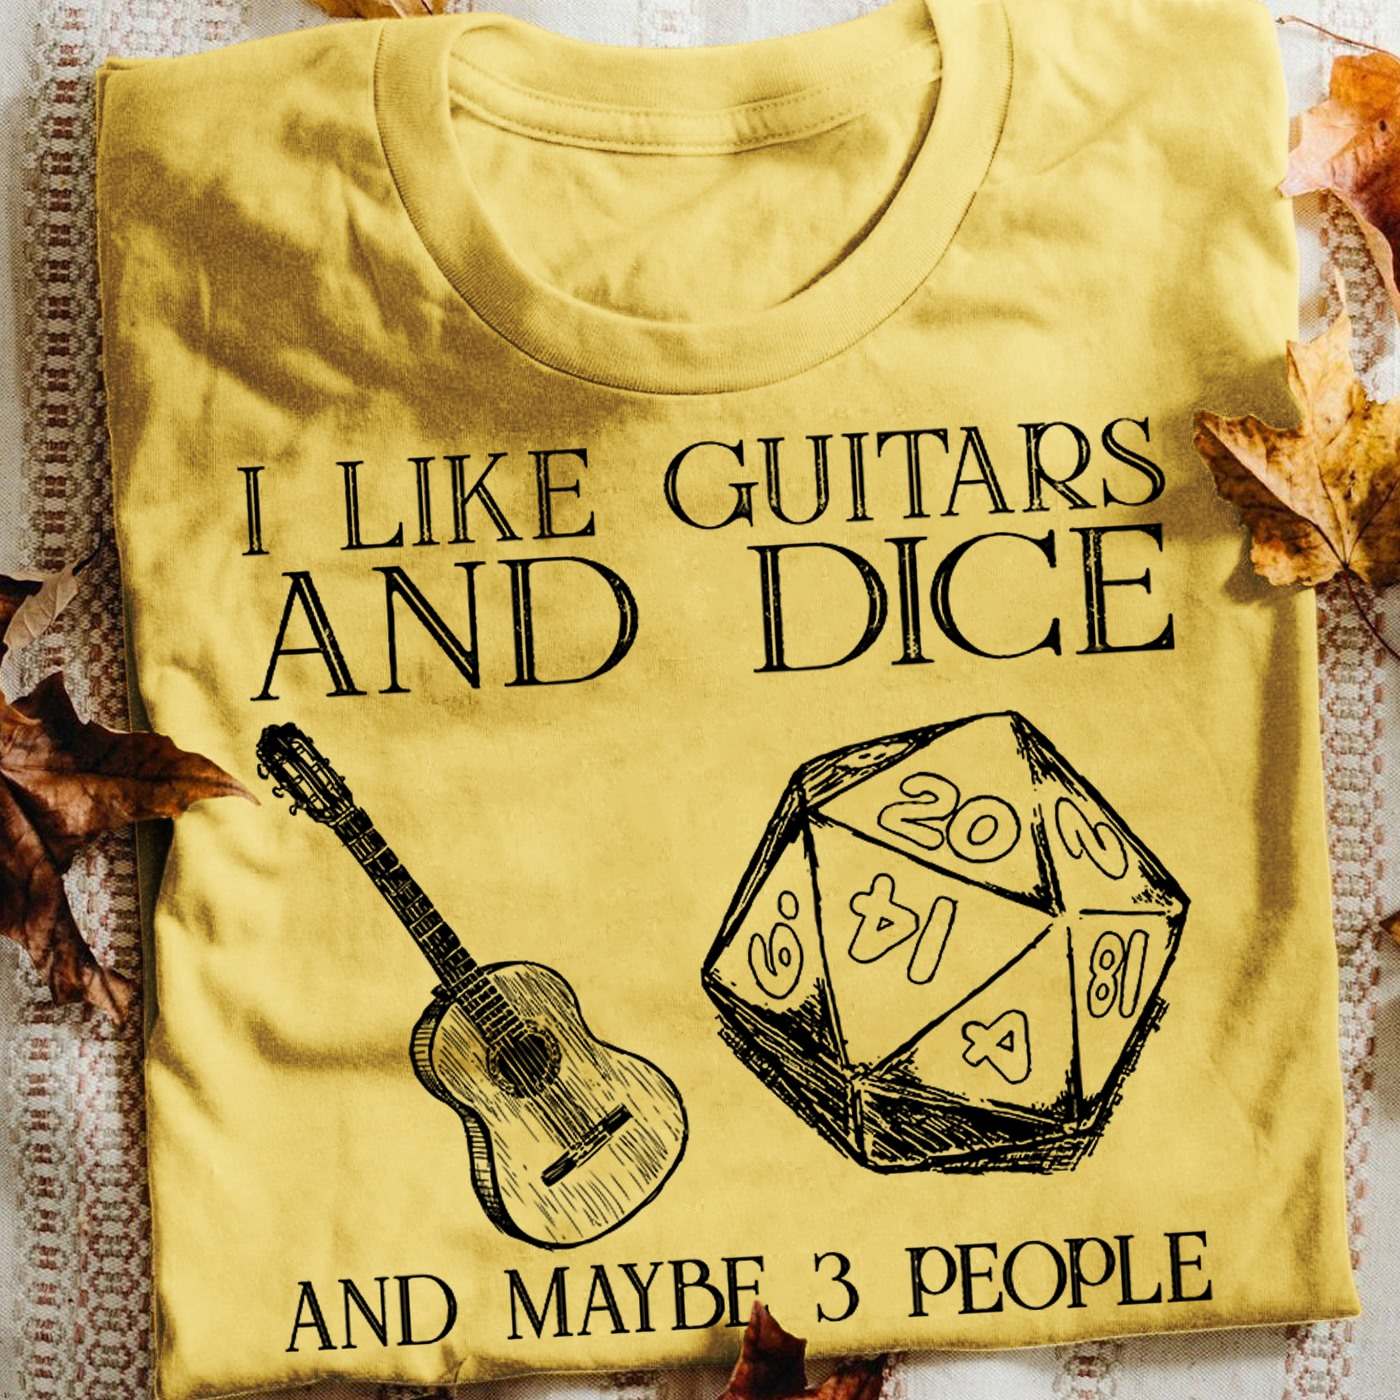 I like guitars and dice and maybe 3 people - Guitarist love d&d game